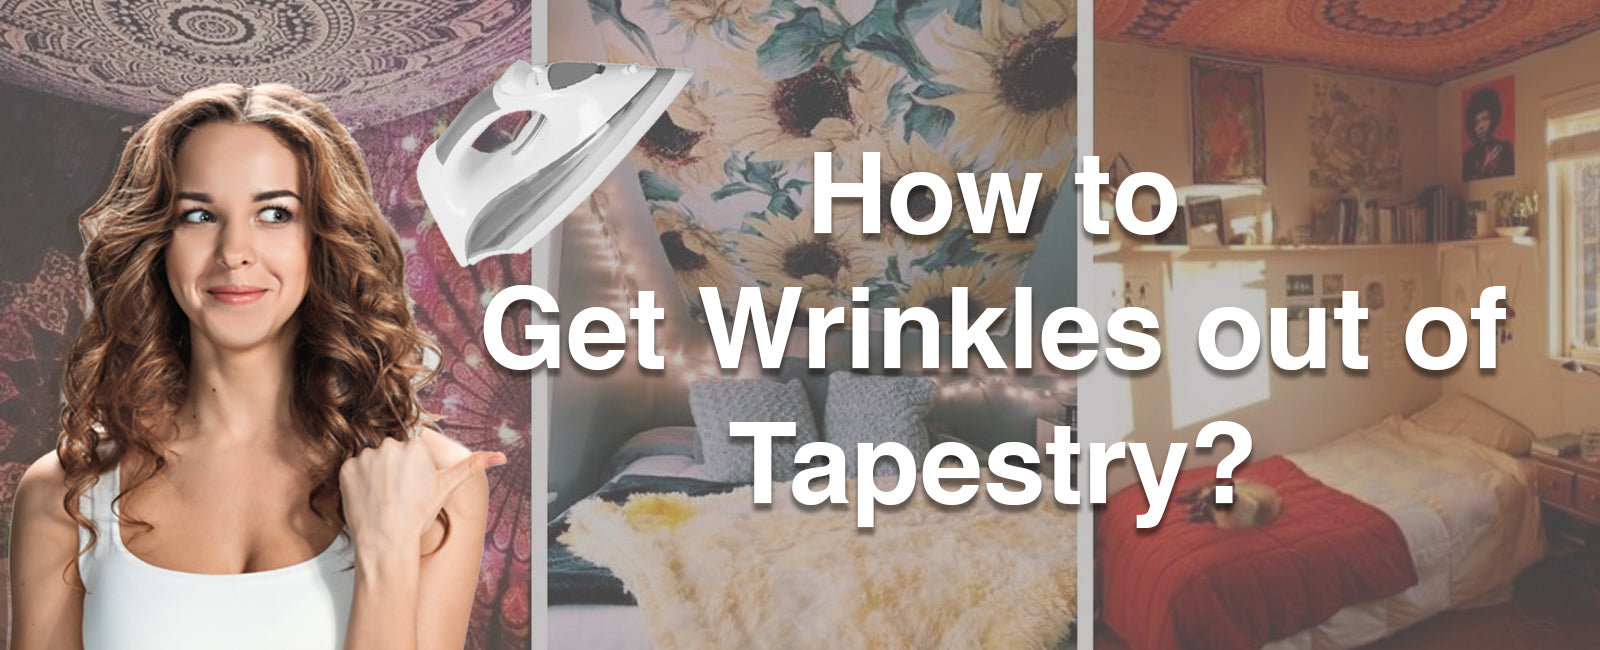 How to Get Wrinkles out of a Tapestry?